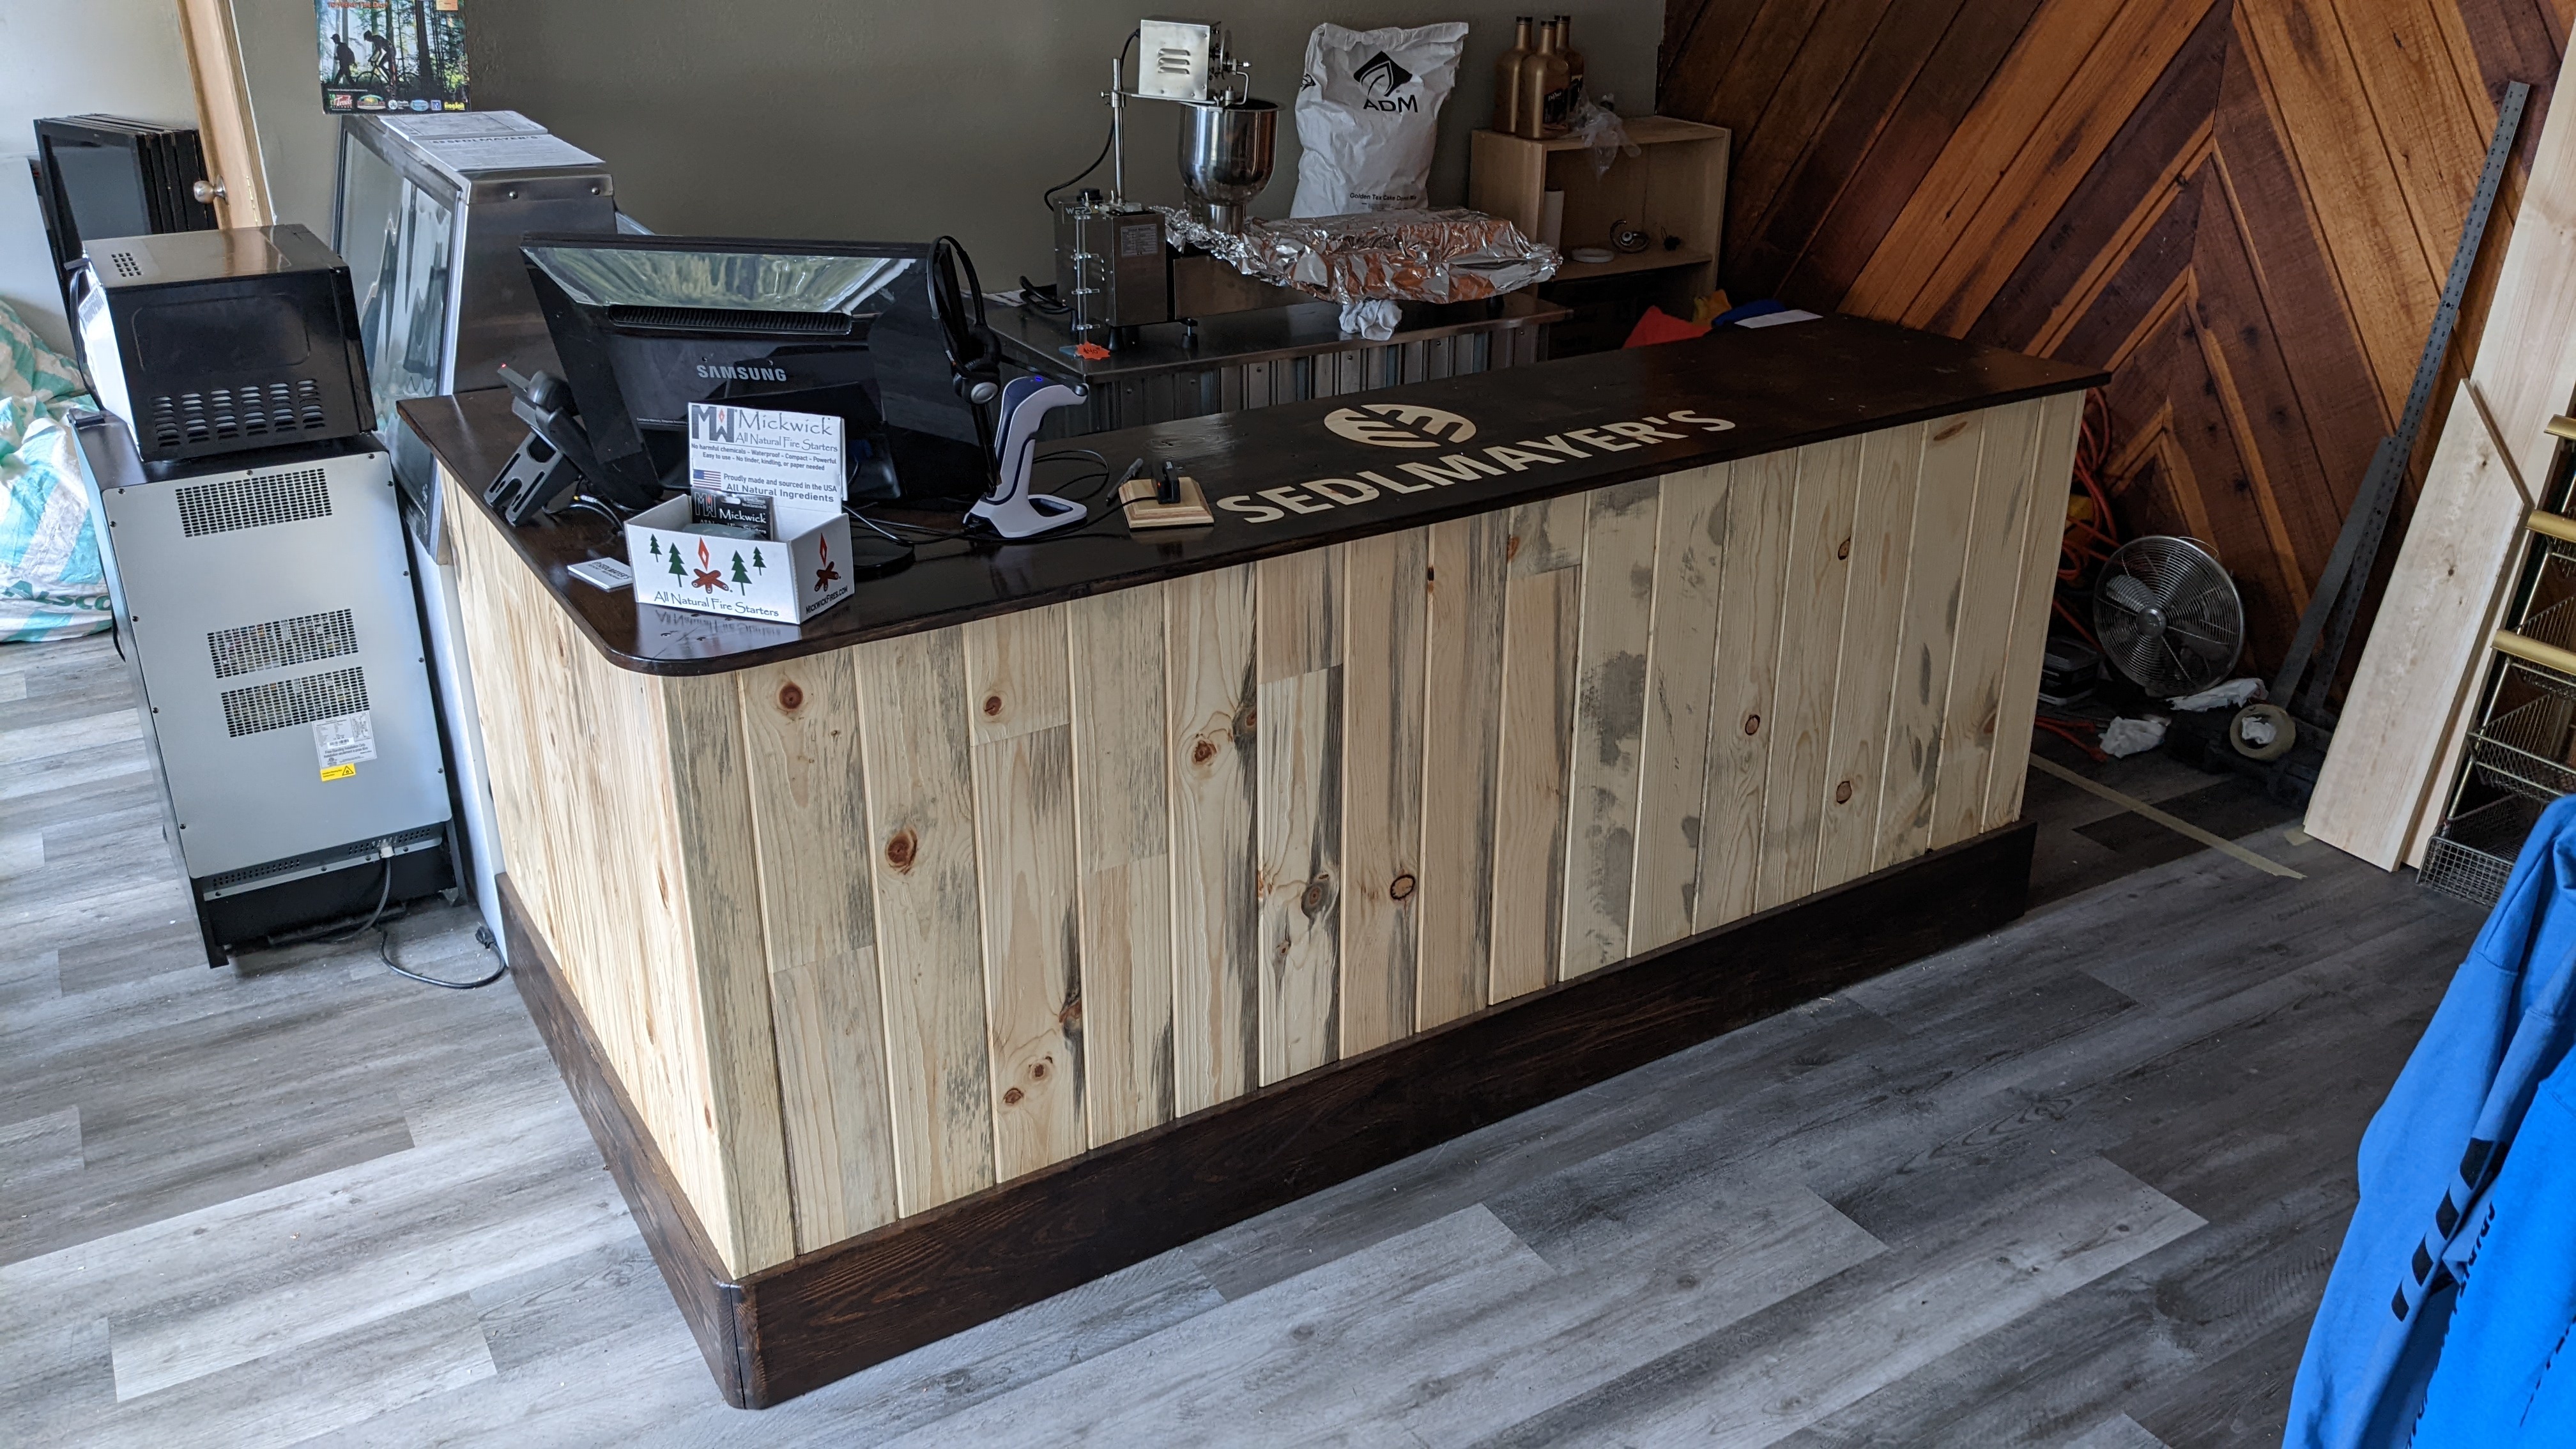 The Store Gets a New Counter